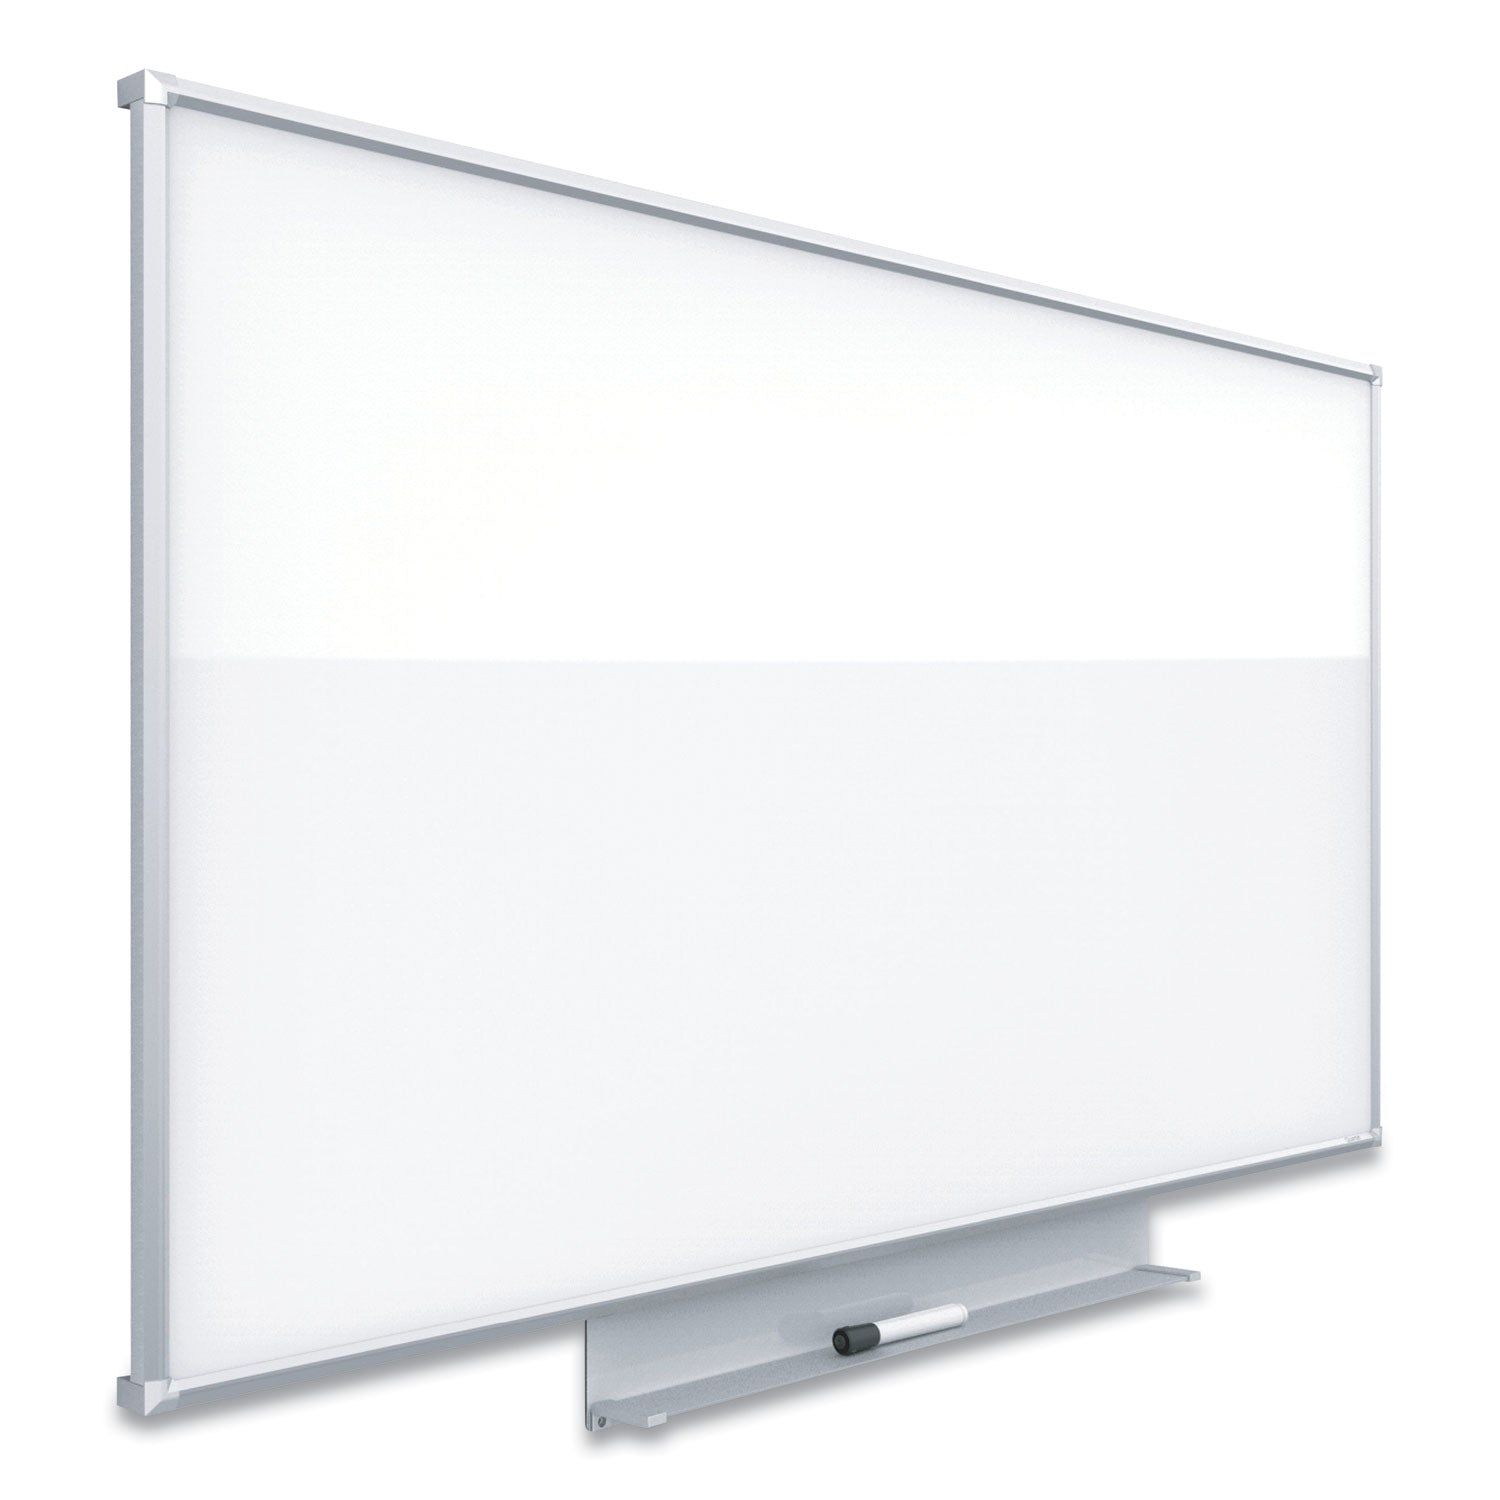 Porcelain Dry Erase Boards, Widescreen, 72 x 48, White Surface, Aluminum Frame - 